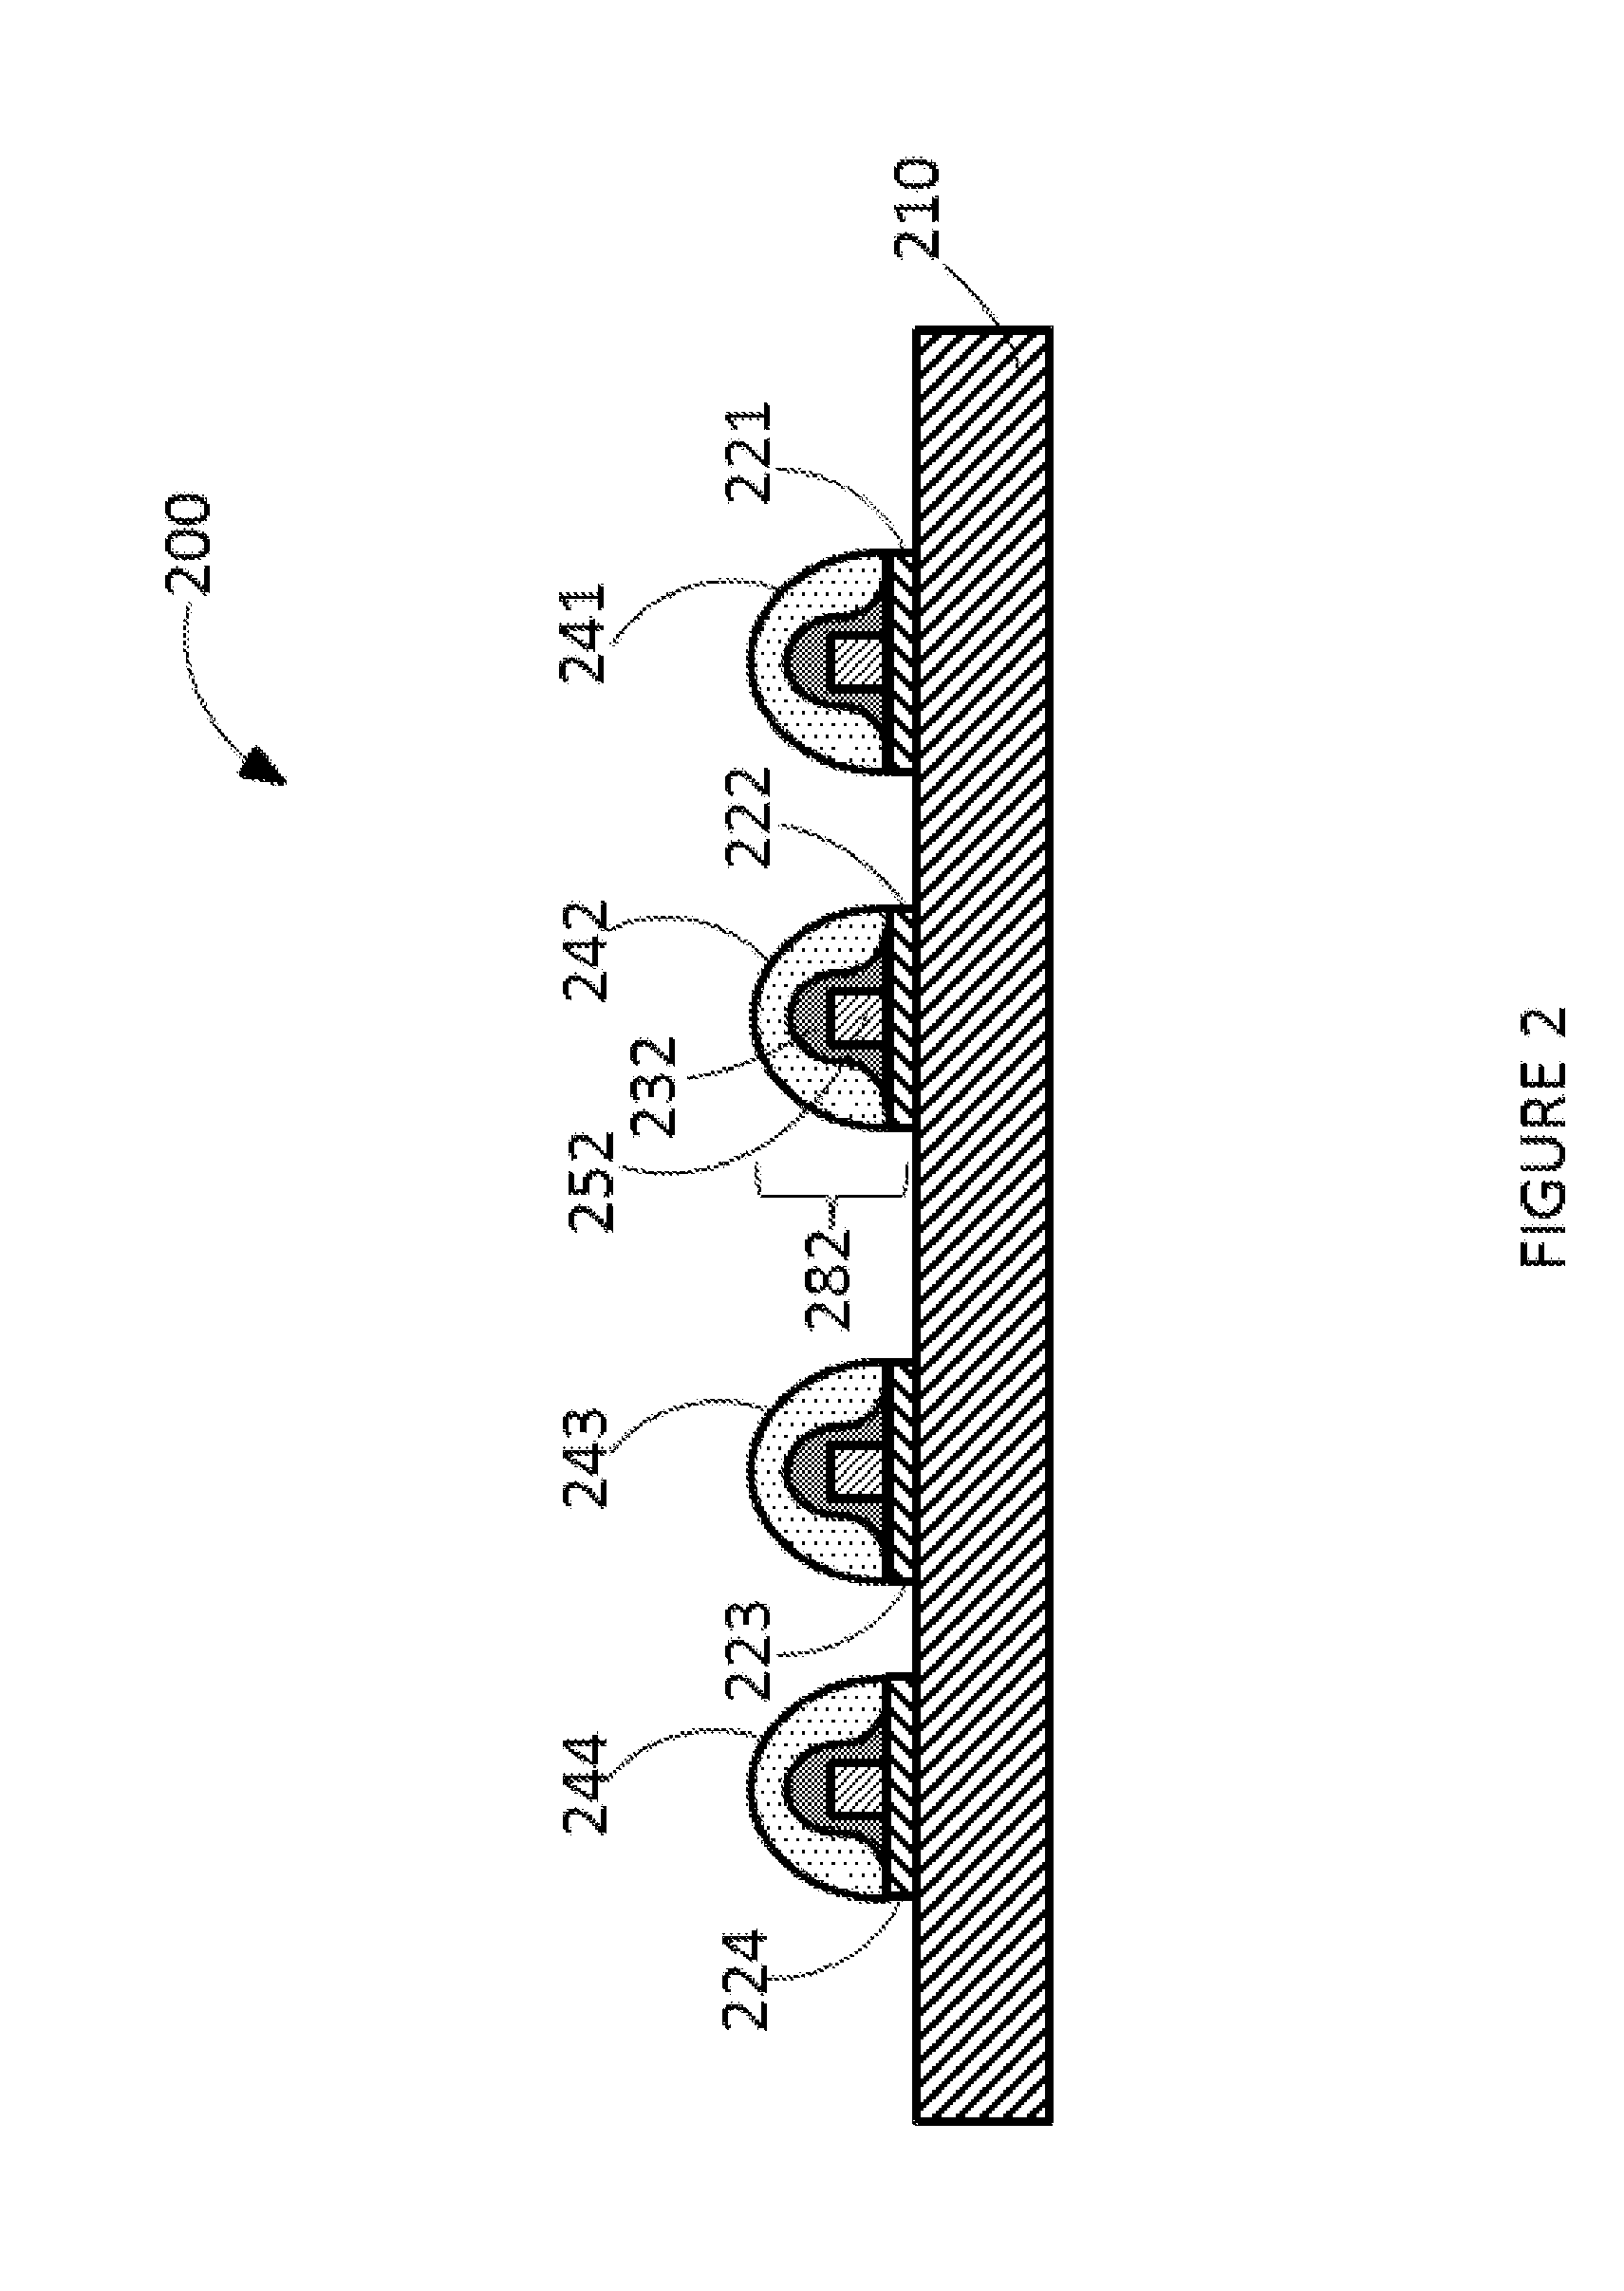 Systems and methods for testing and packaging a superconducting chip